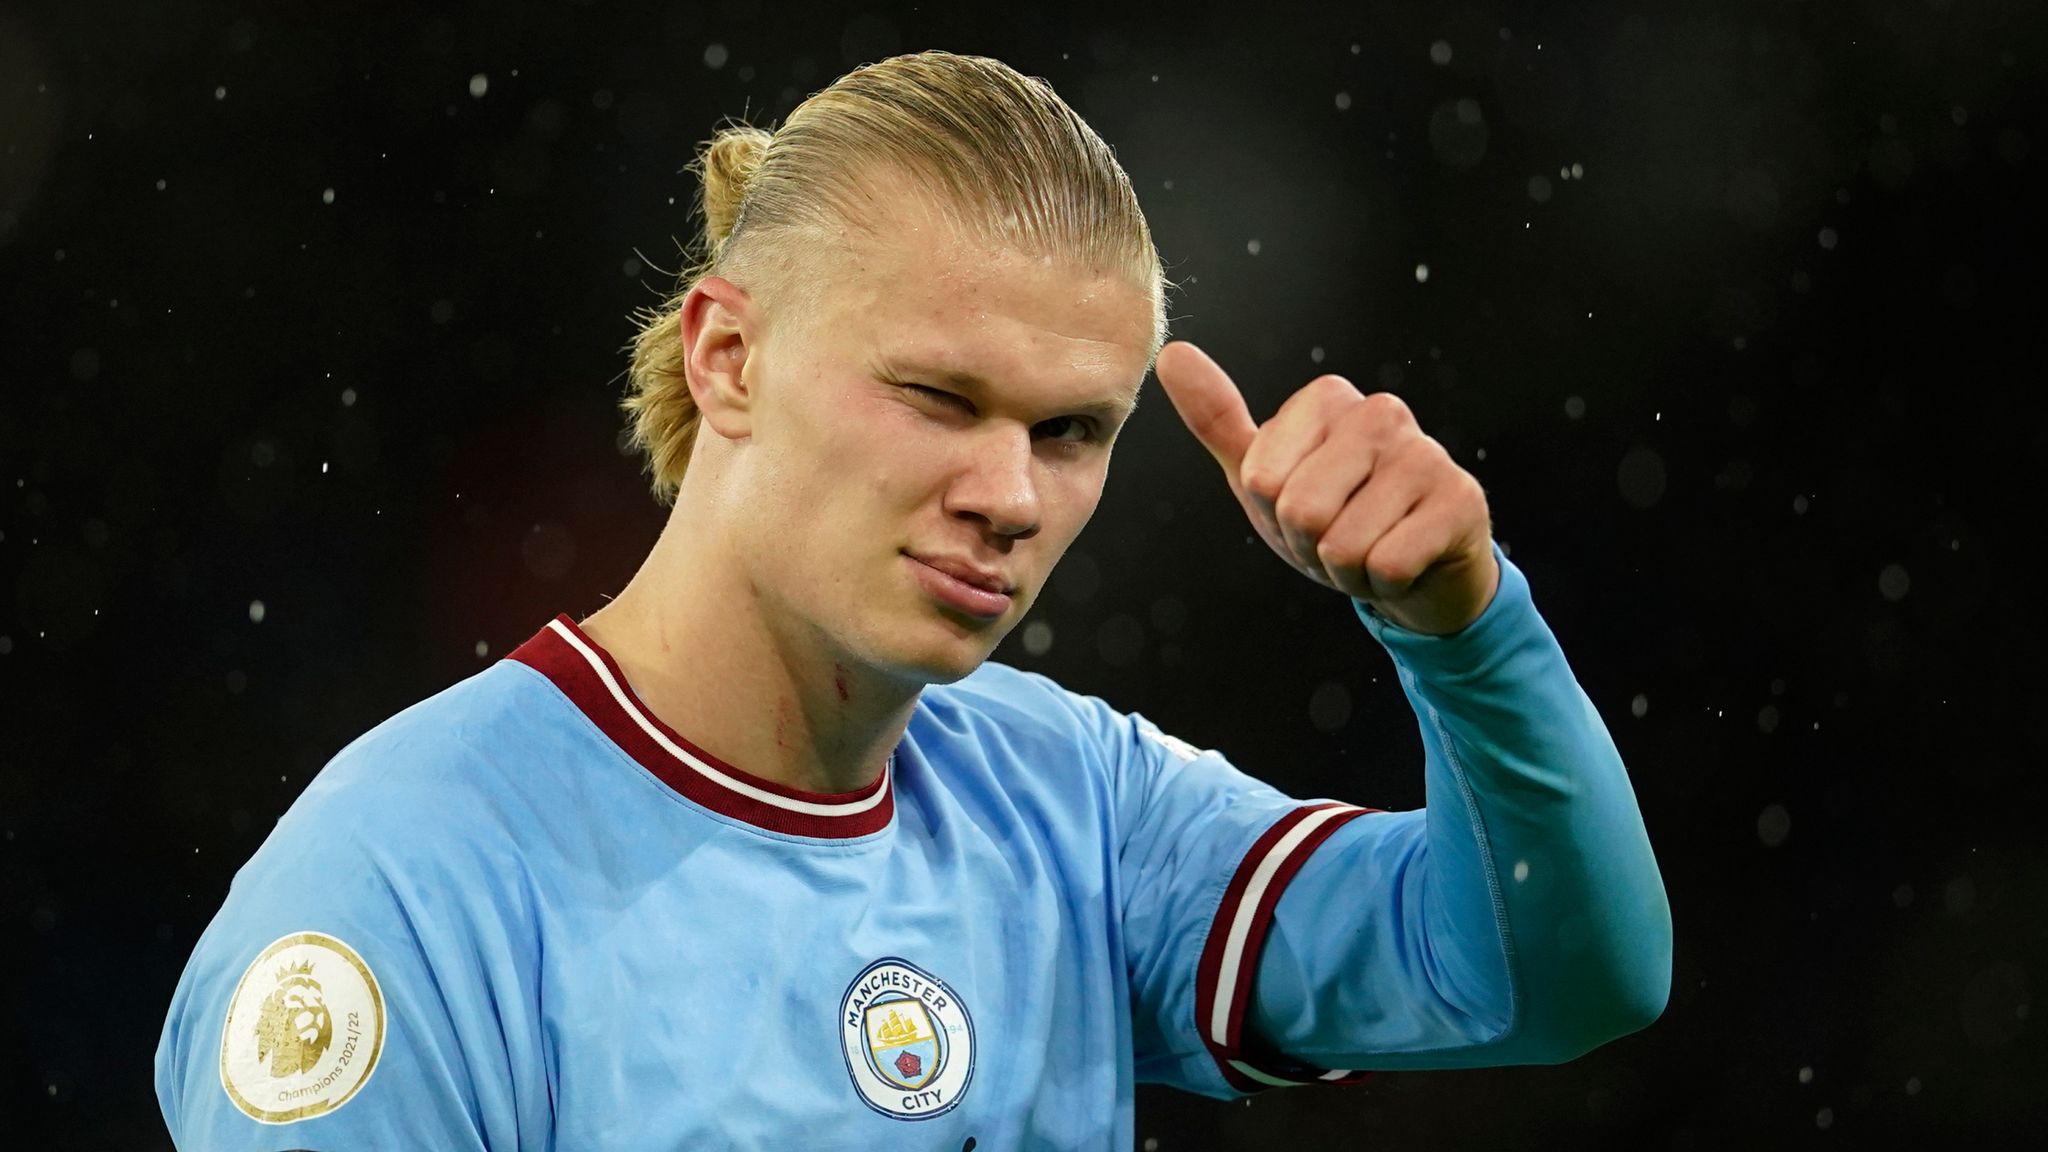 Erling Haaland: Man City manager Pep Guardiola refuses to rule striker out of Premier League match vs Liverpool | Football News | Sky Sports